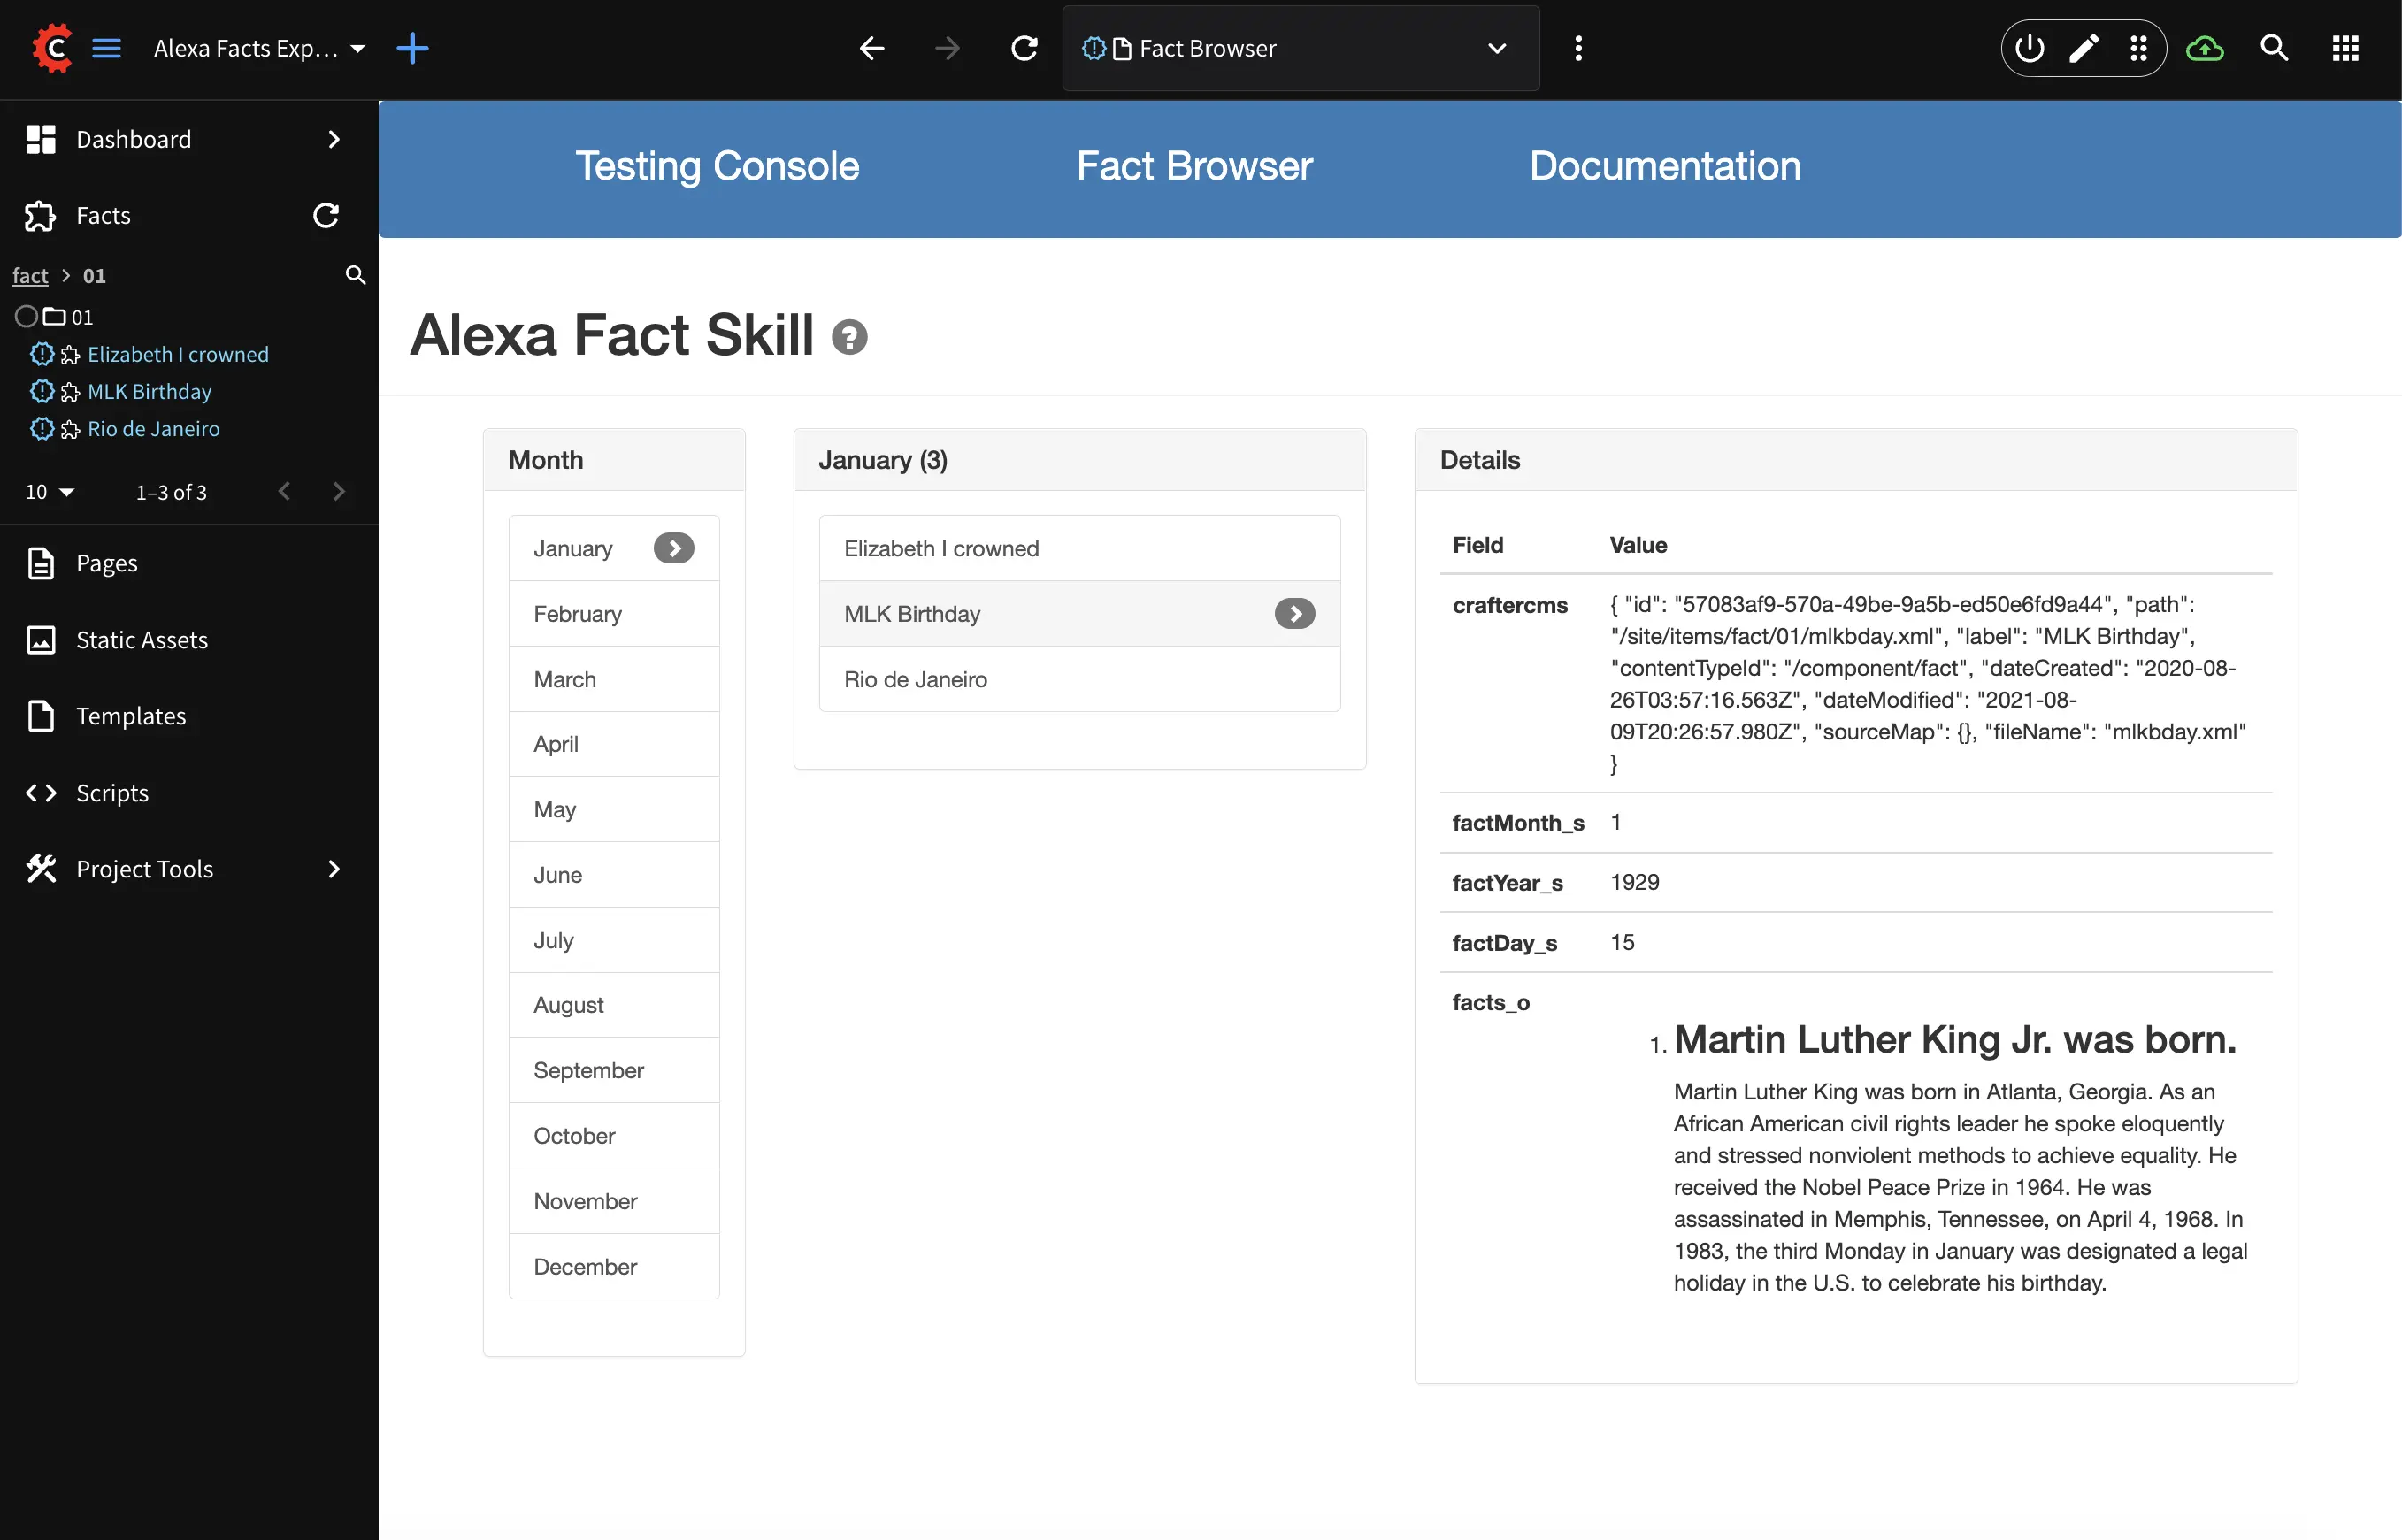 Authoring tools provided through Crafter Studio to test Alexa digital assistant interactions.